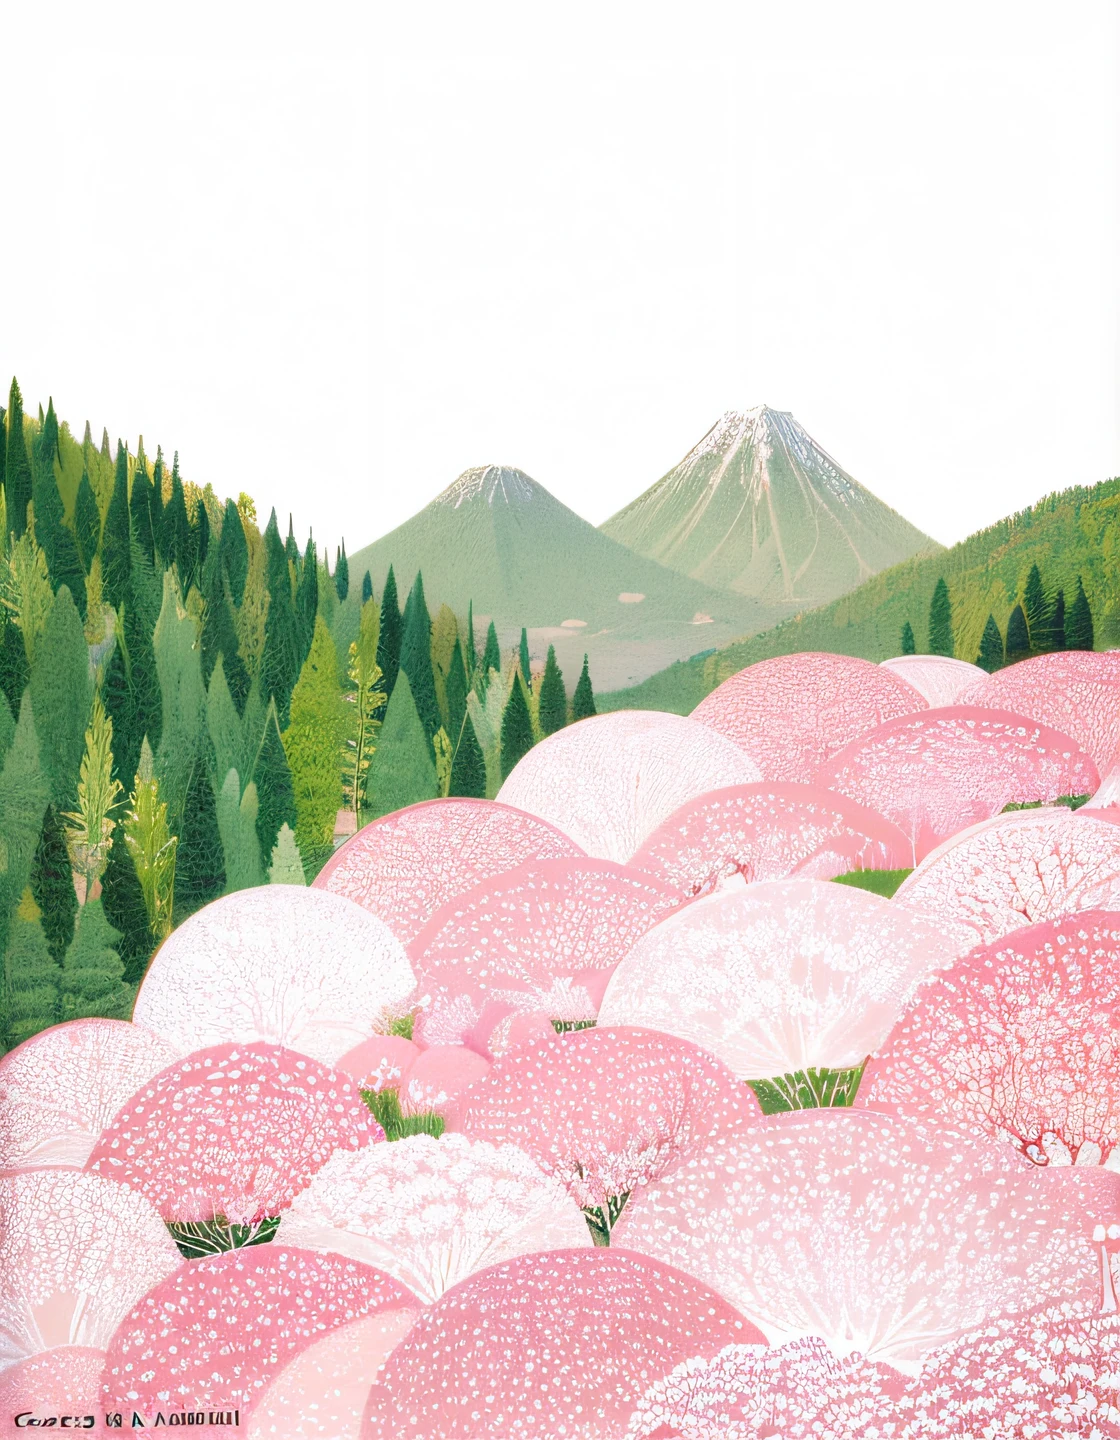 there is a picture of a pink flower field with mountains in the background, cherry blossom forest, background of flowery hill, japan mountains, pink forest, pink landscape, landscape illustration, lush sakura, mount fuji background, mythical floral hills, lush sakura trees, mountain forest in background, japanese landscape, mountainous background, sakura trees, detailed scenery —width 672